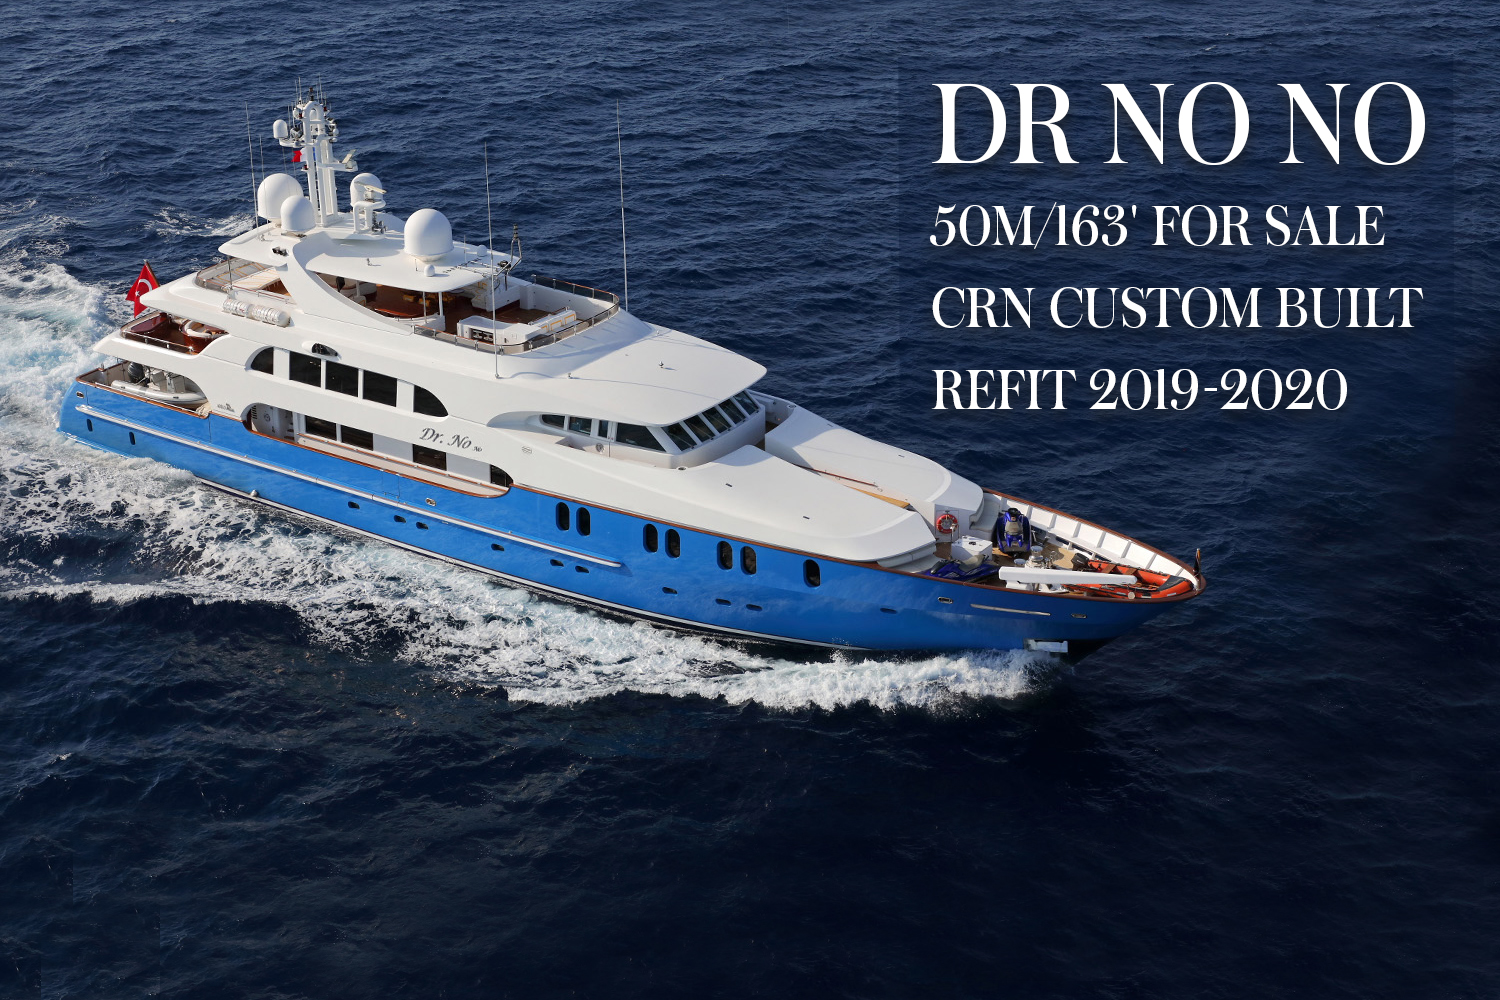 dr no yacht for sale